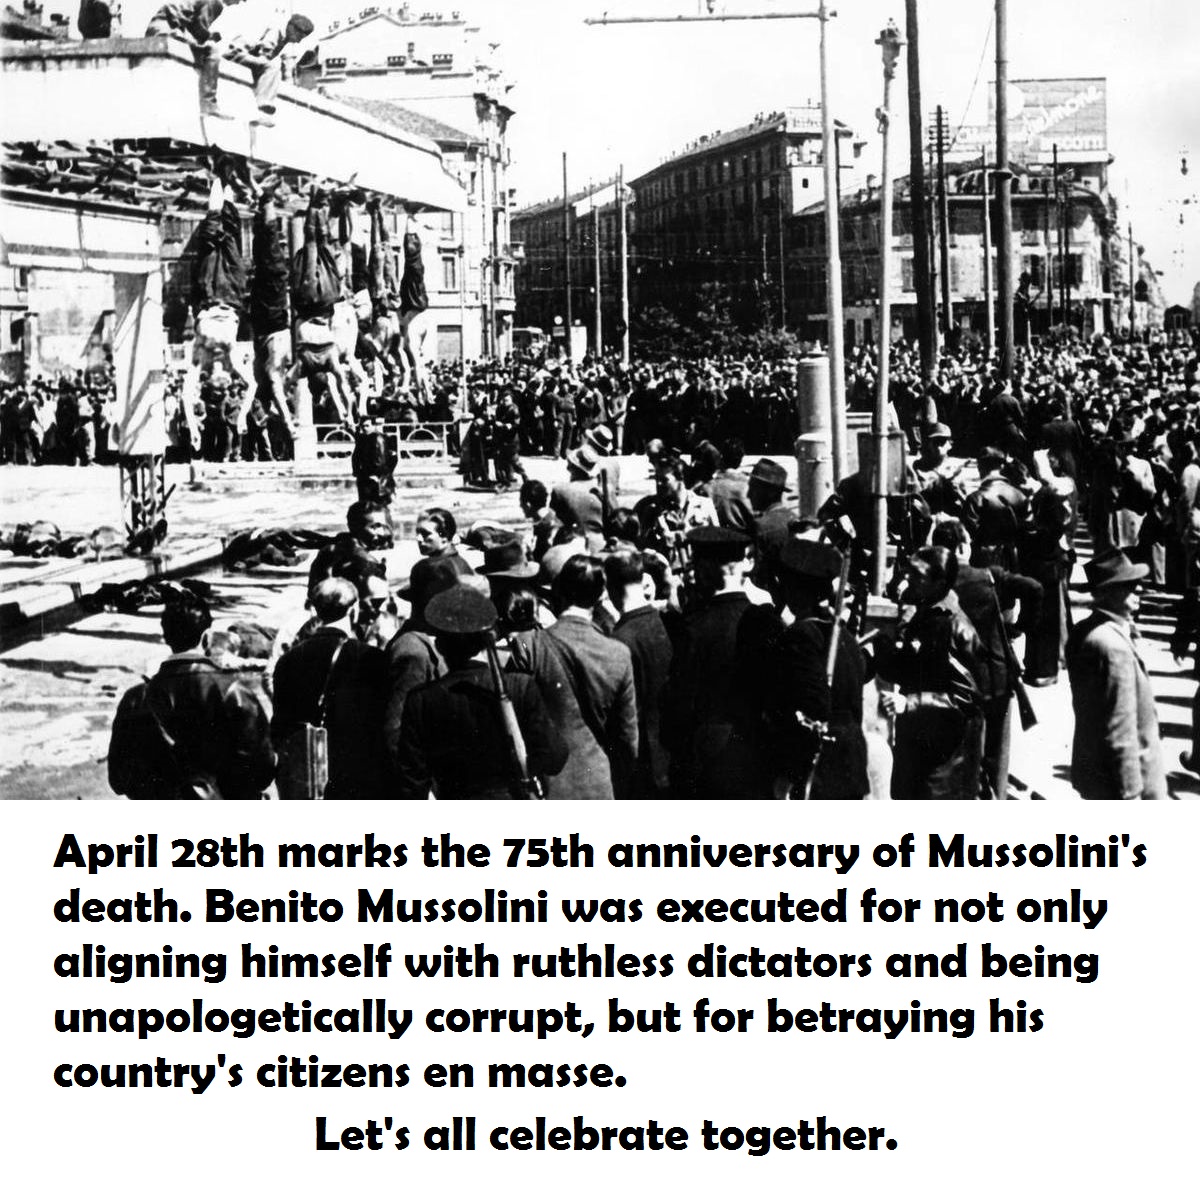 mussolini hanging upside down - Int April 28th marks the 75th anniversary of Mussolini's death. Benito Mussolini was executed for not only aligning himself with ruthless dictators and being unapologetically corrupt, but for betraying his country's citizen